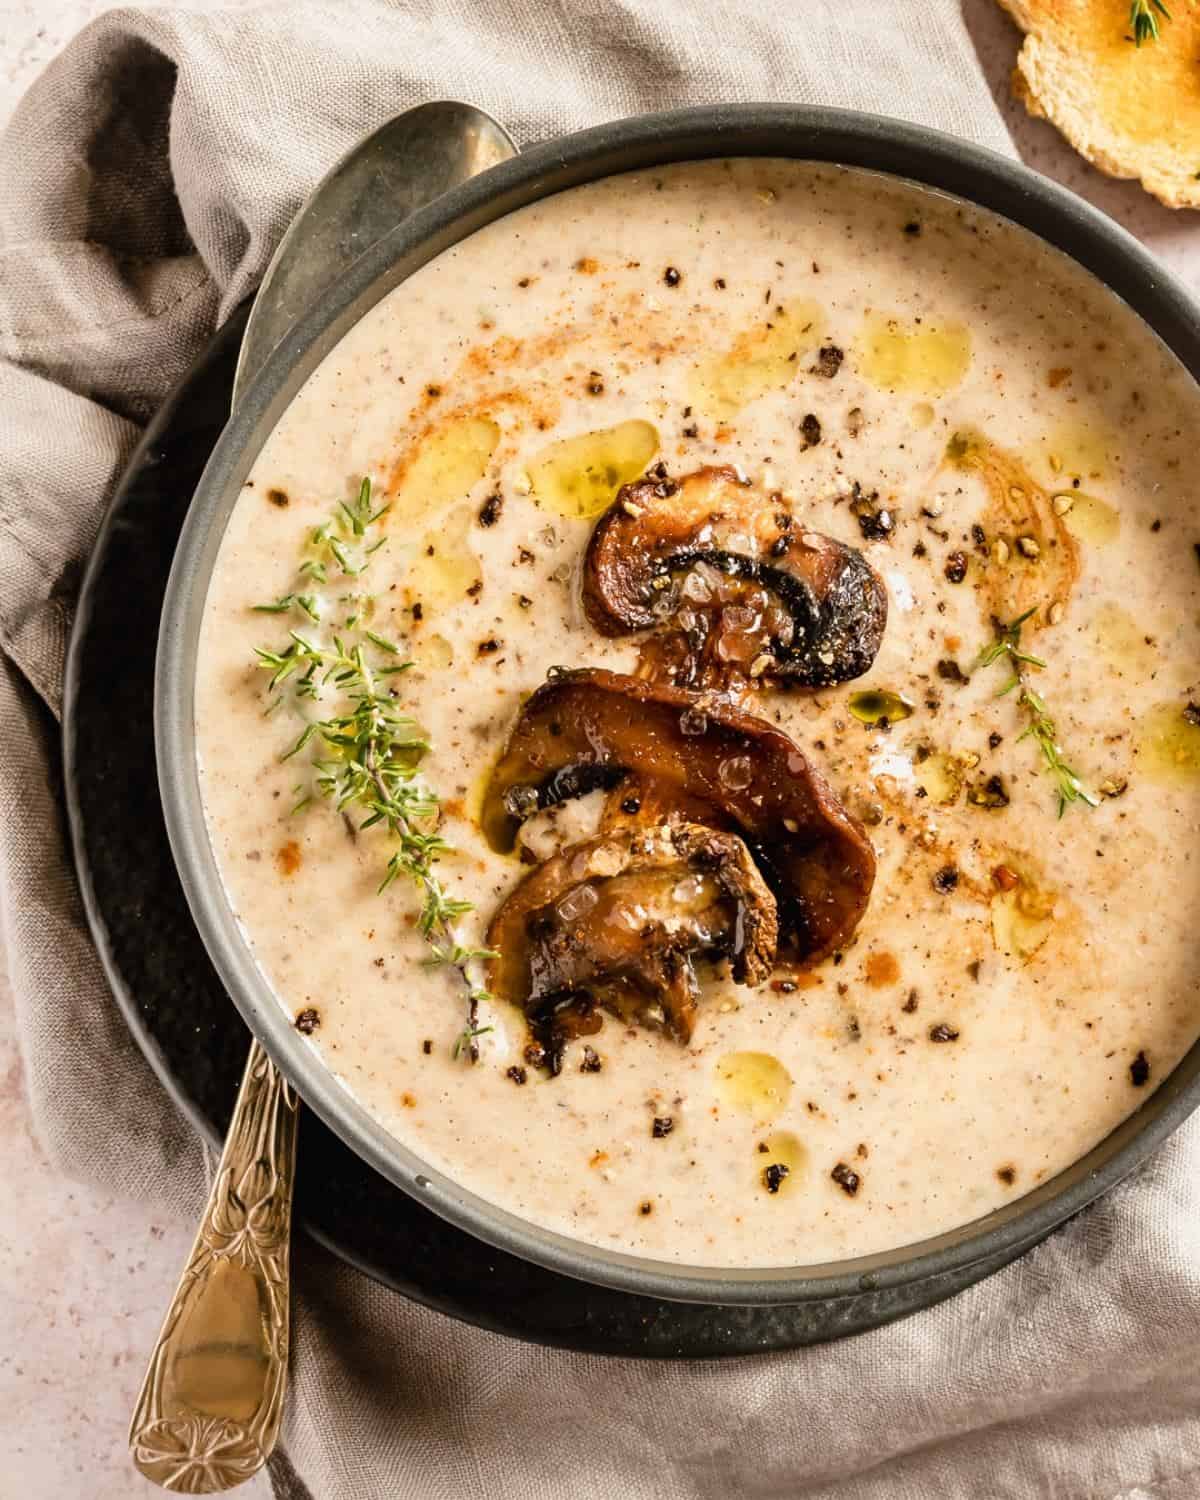 A view from above Mushrooms soup in a dark bowl on a beige linen and marble table. The dish is garnished with Mushroom and black pepper. On the side a spoon